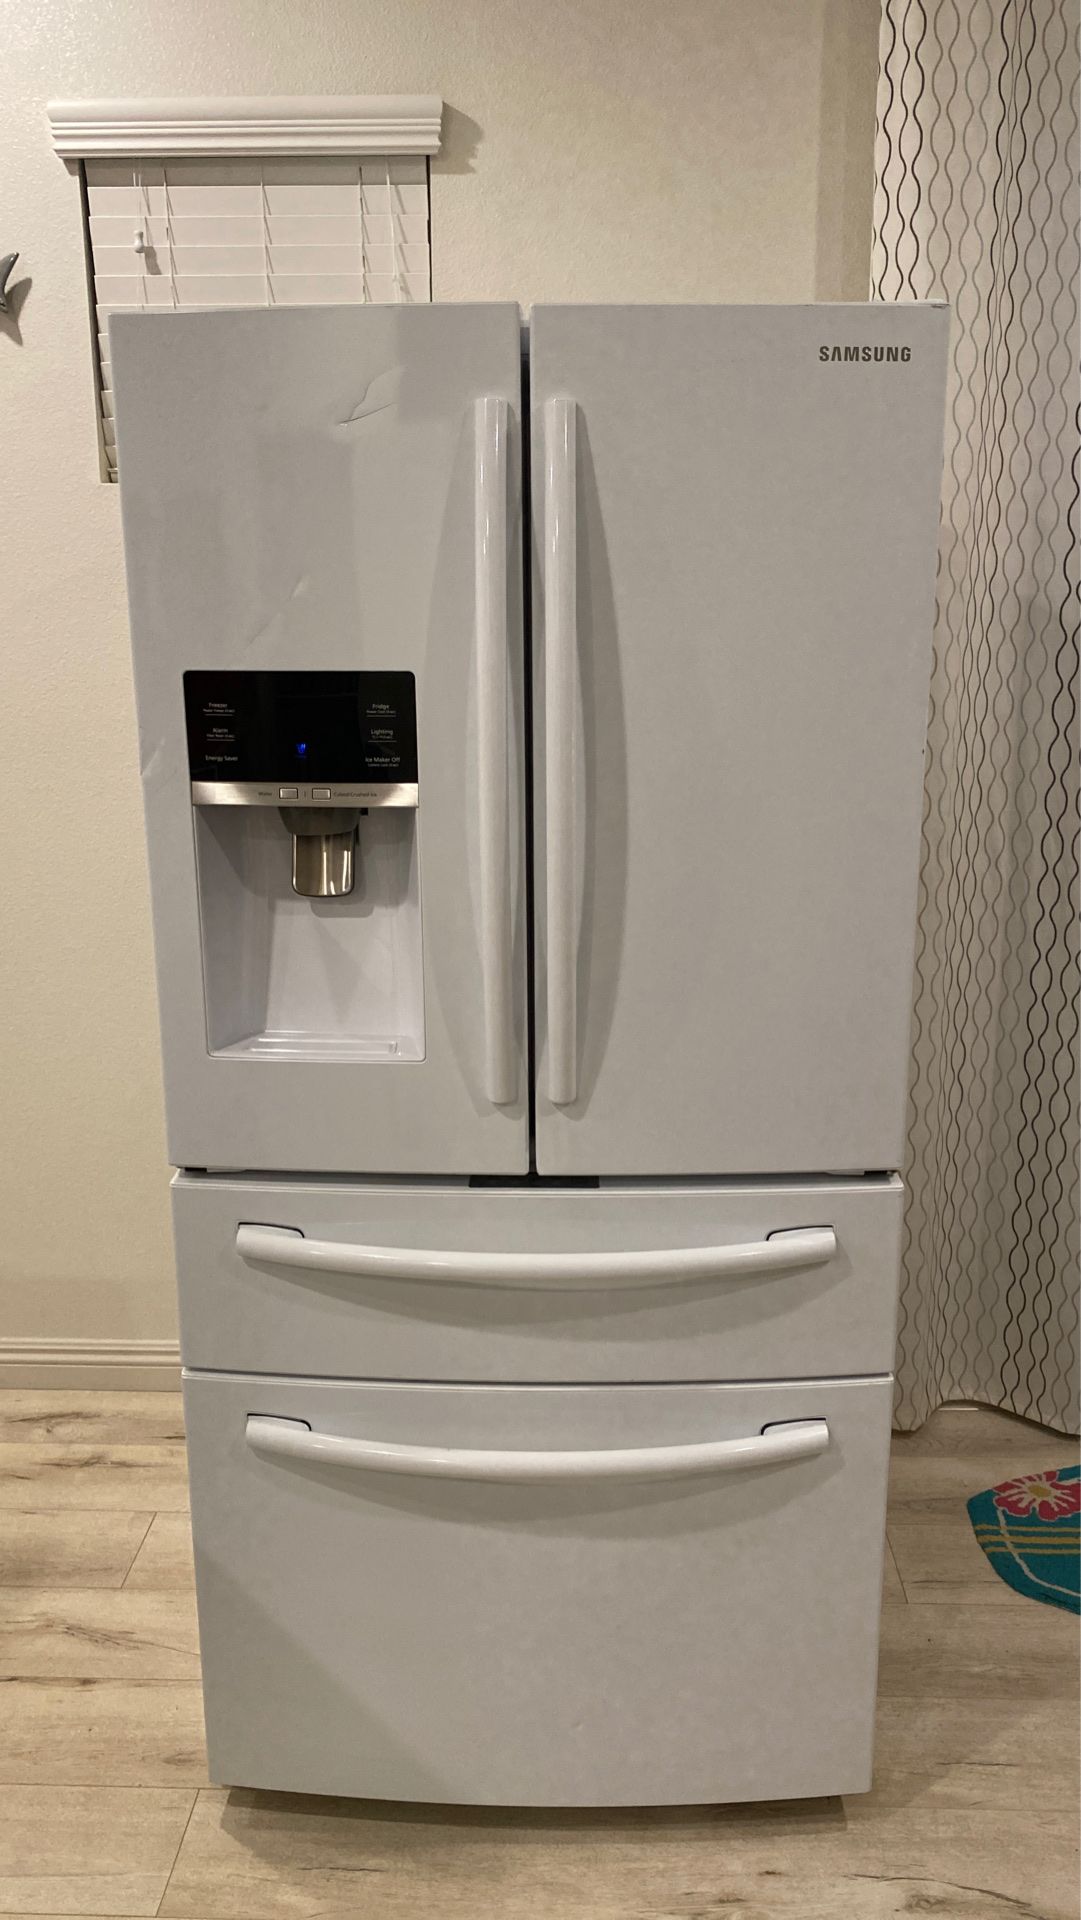 Samsung Refrigerator White French Door 25 cu ft with warranty till 2021